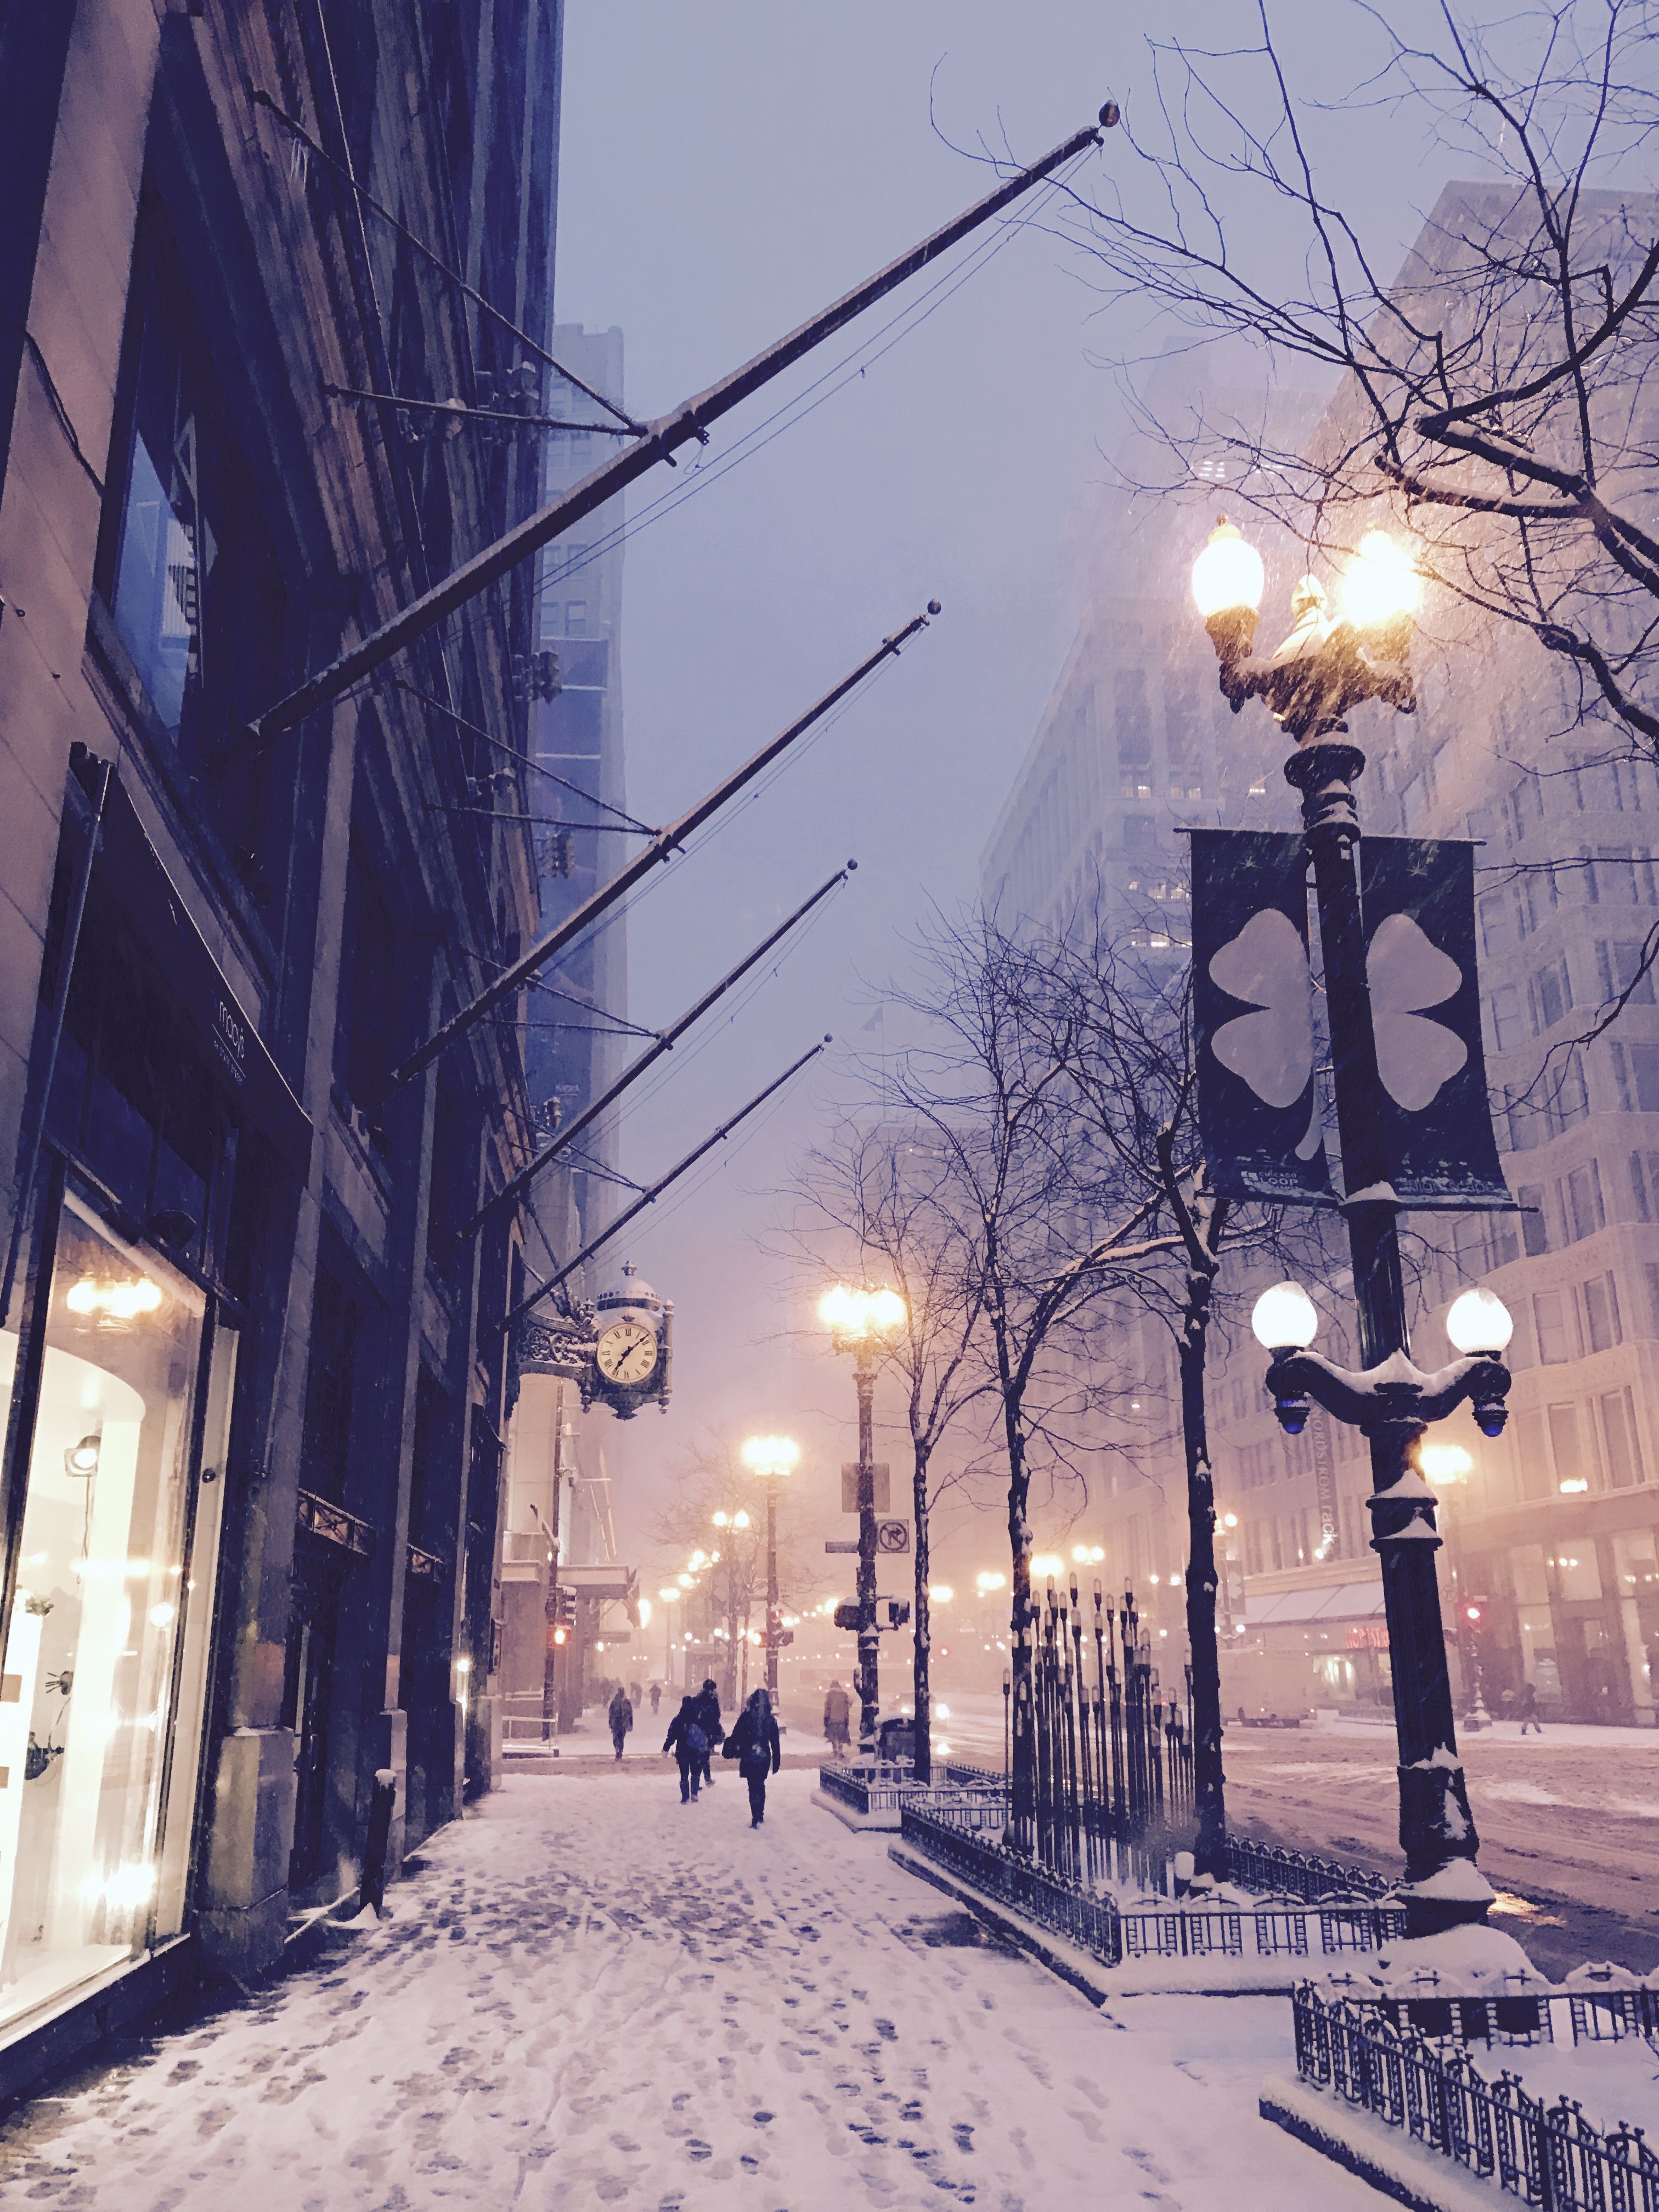 That cold winter morning of 14 Mar2017. Winter city, Chicago picture, Chicago winter